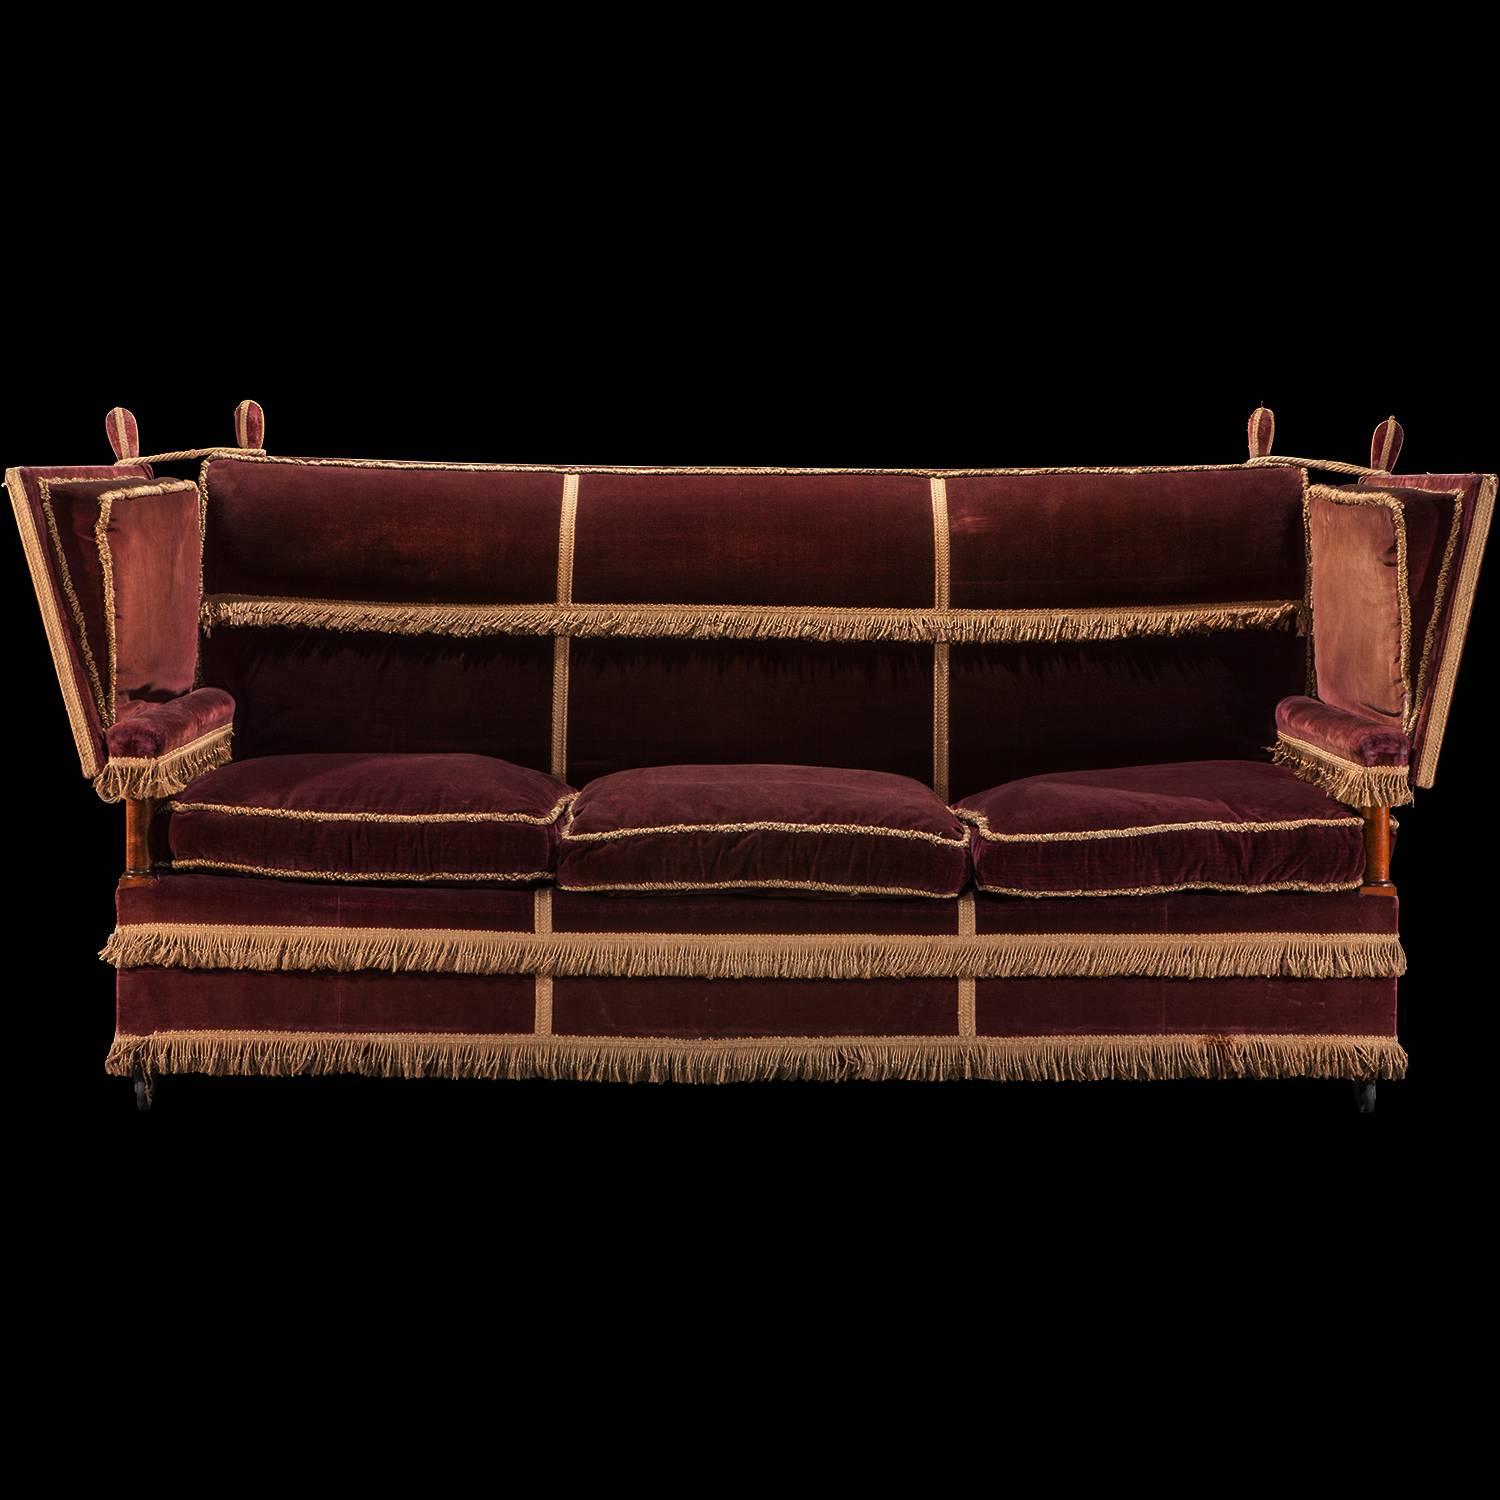 Original faded velvet upholstery, with down filled cushions.

Made in England, circa 1910.